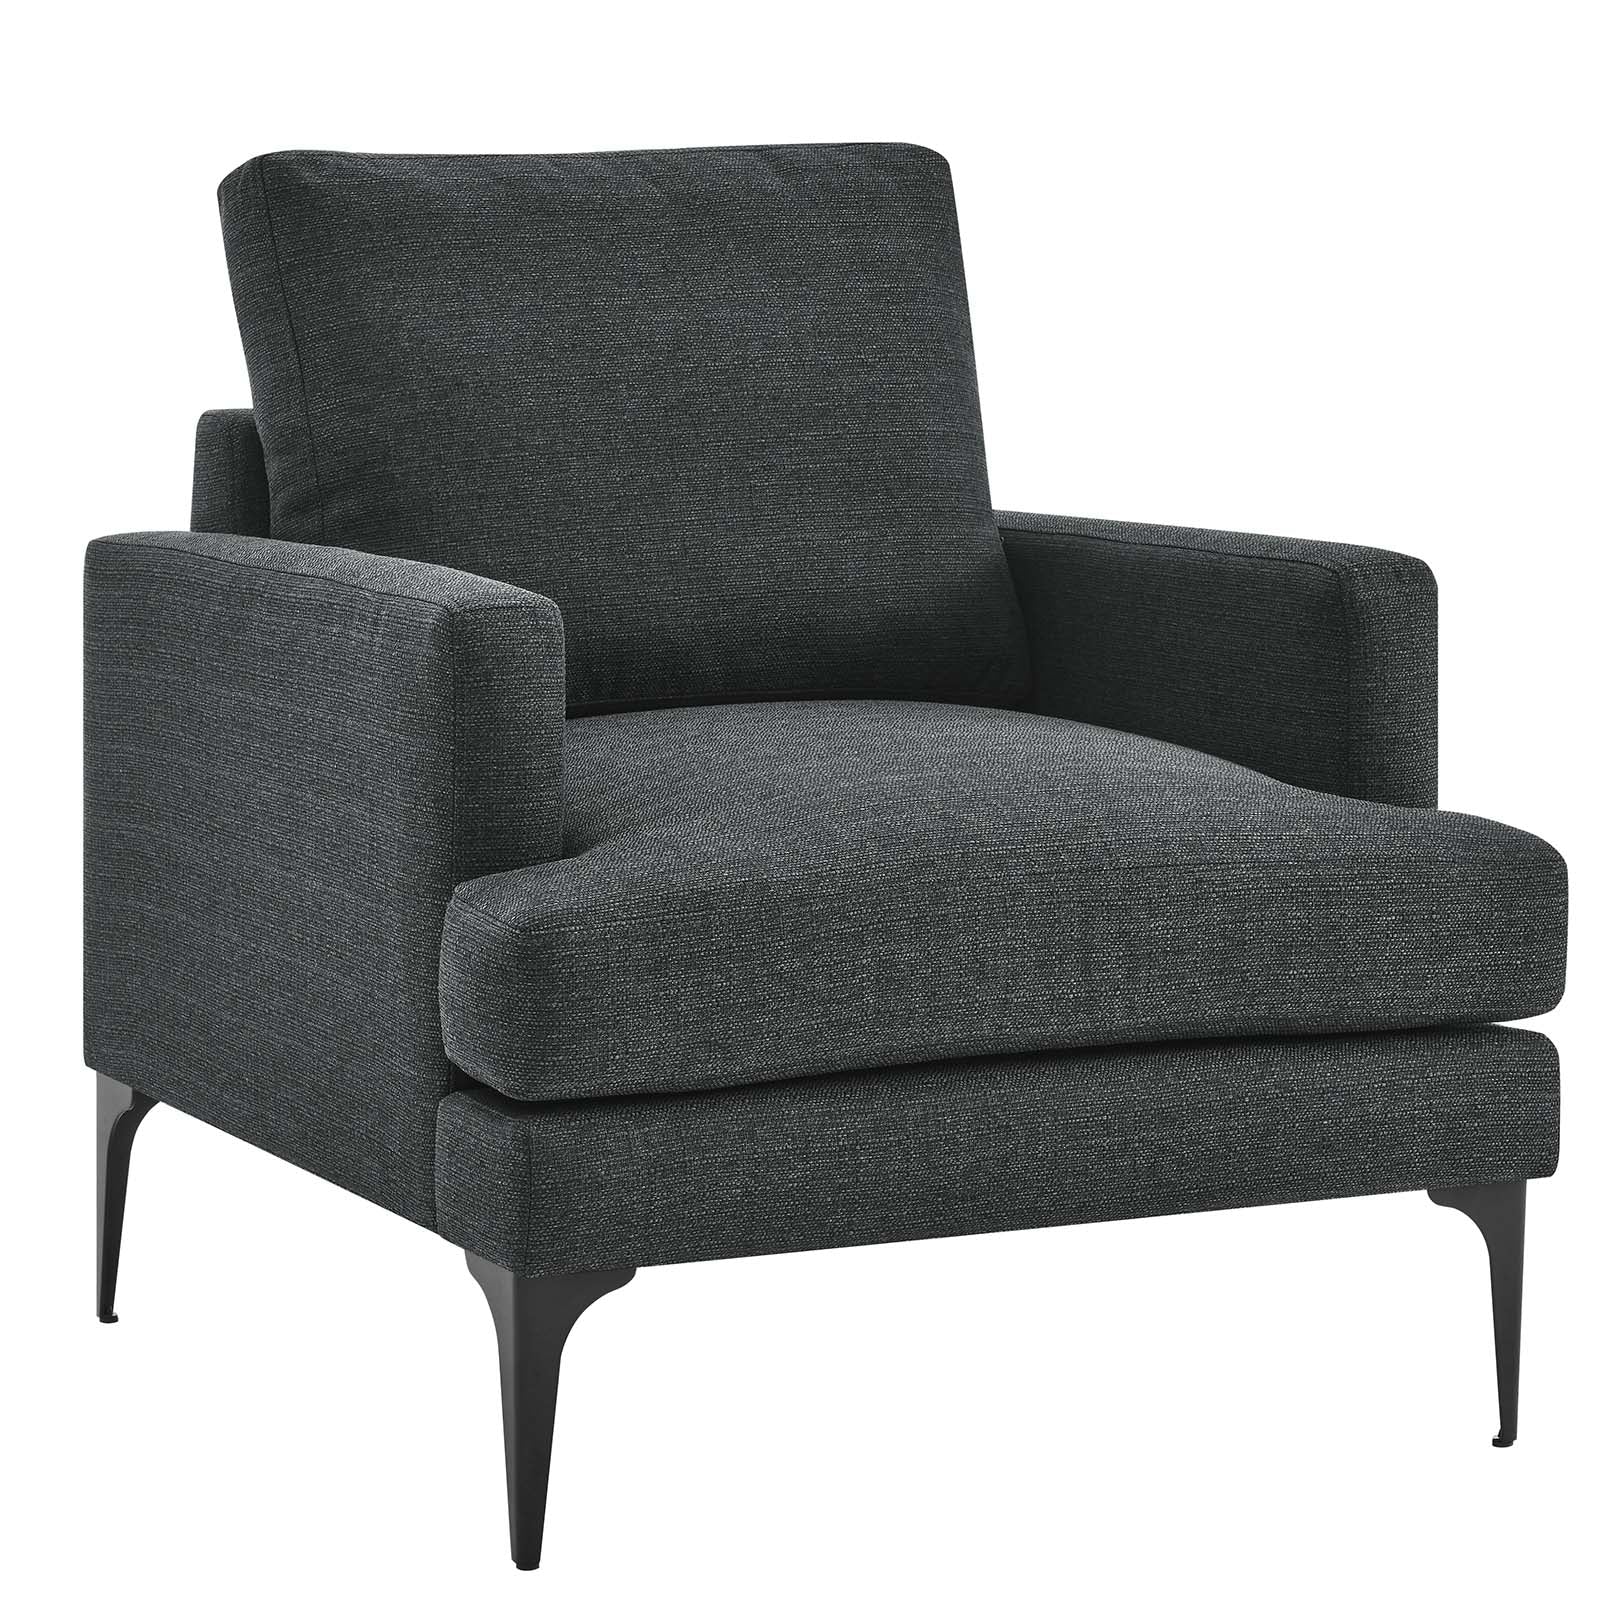 Evermore Upholstered Fabric Armchair - East Shore Modern Home Furnishings